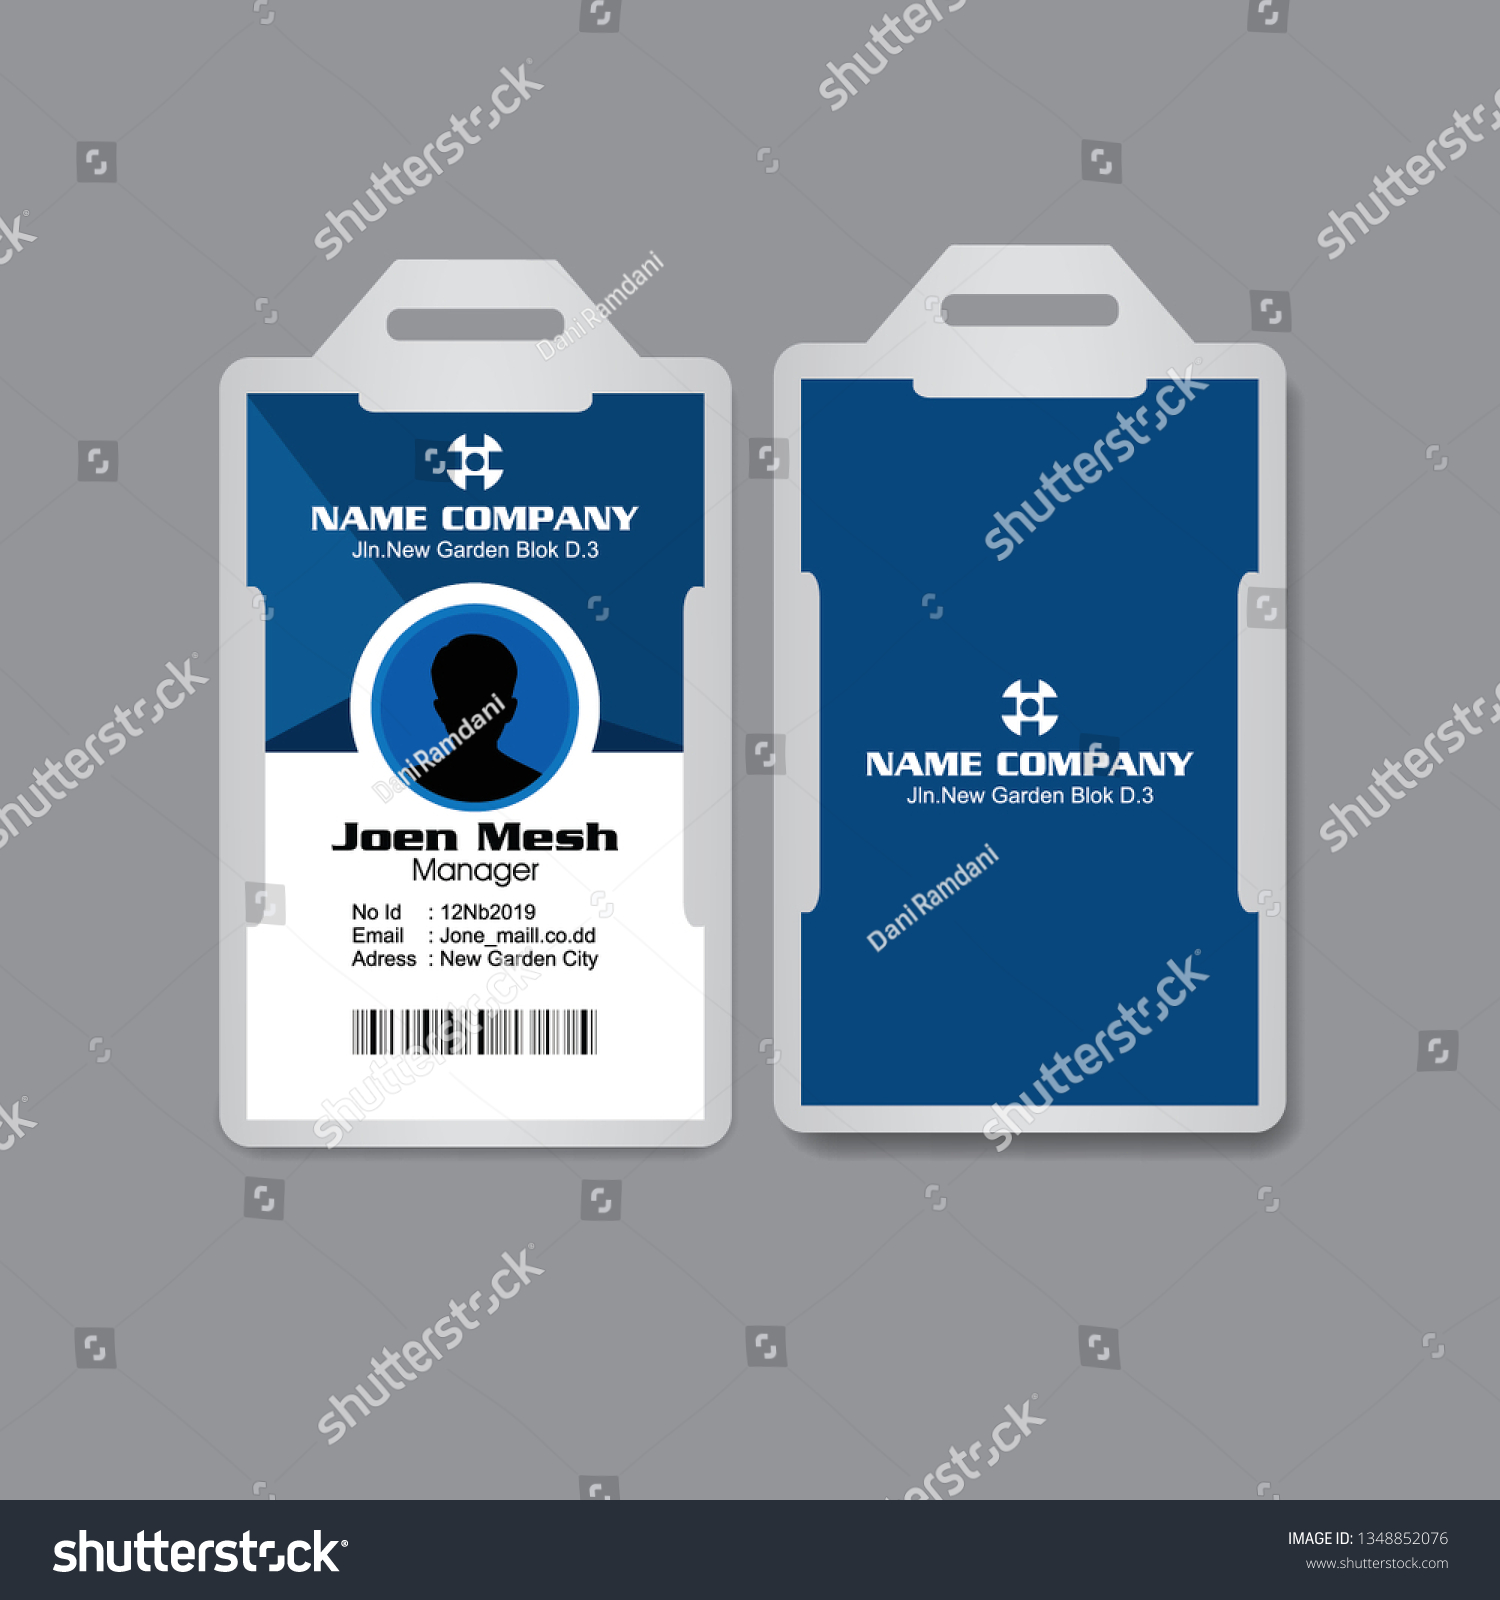 Blue Employee Id Card Design Template Simple Royalty Free Stock Vector 1348852076 2458